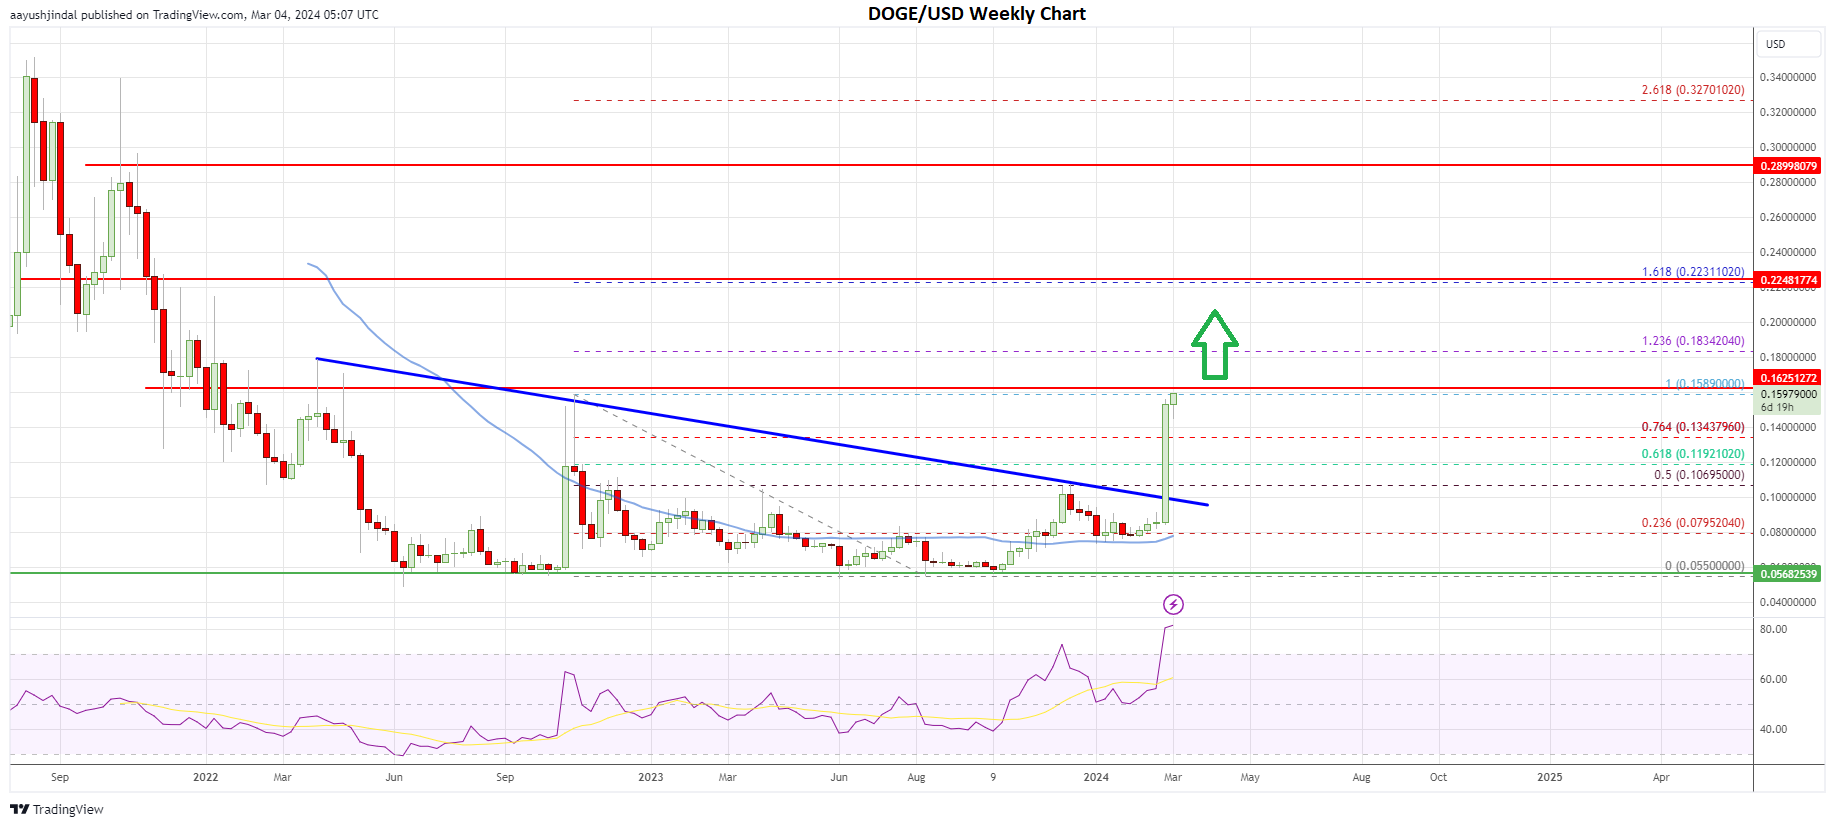 Dogecoin price weekly chart | Source: DOGE/USD on TradingView.com